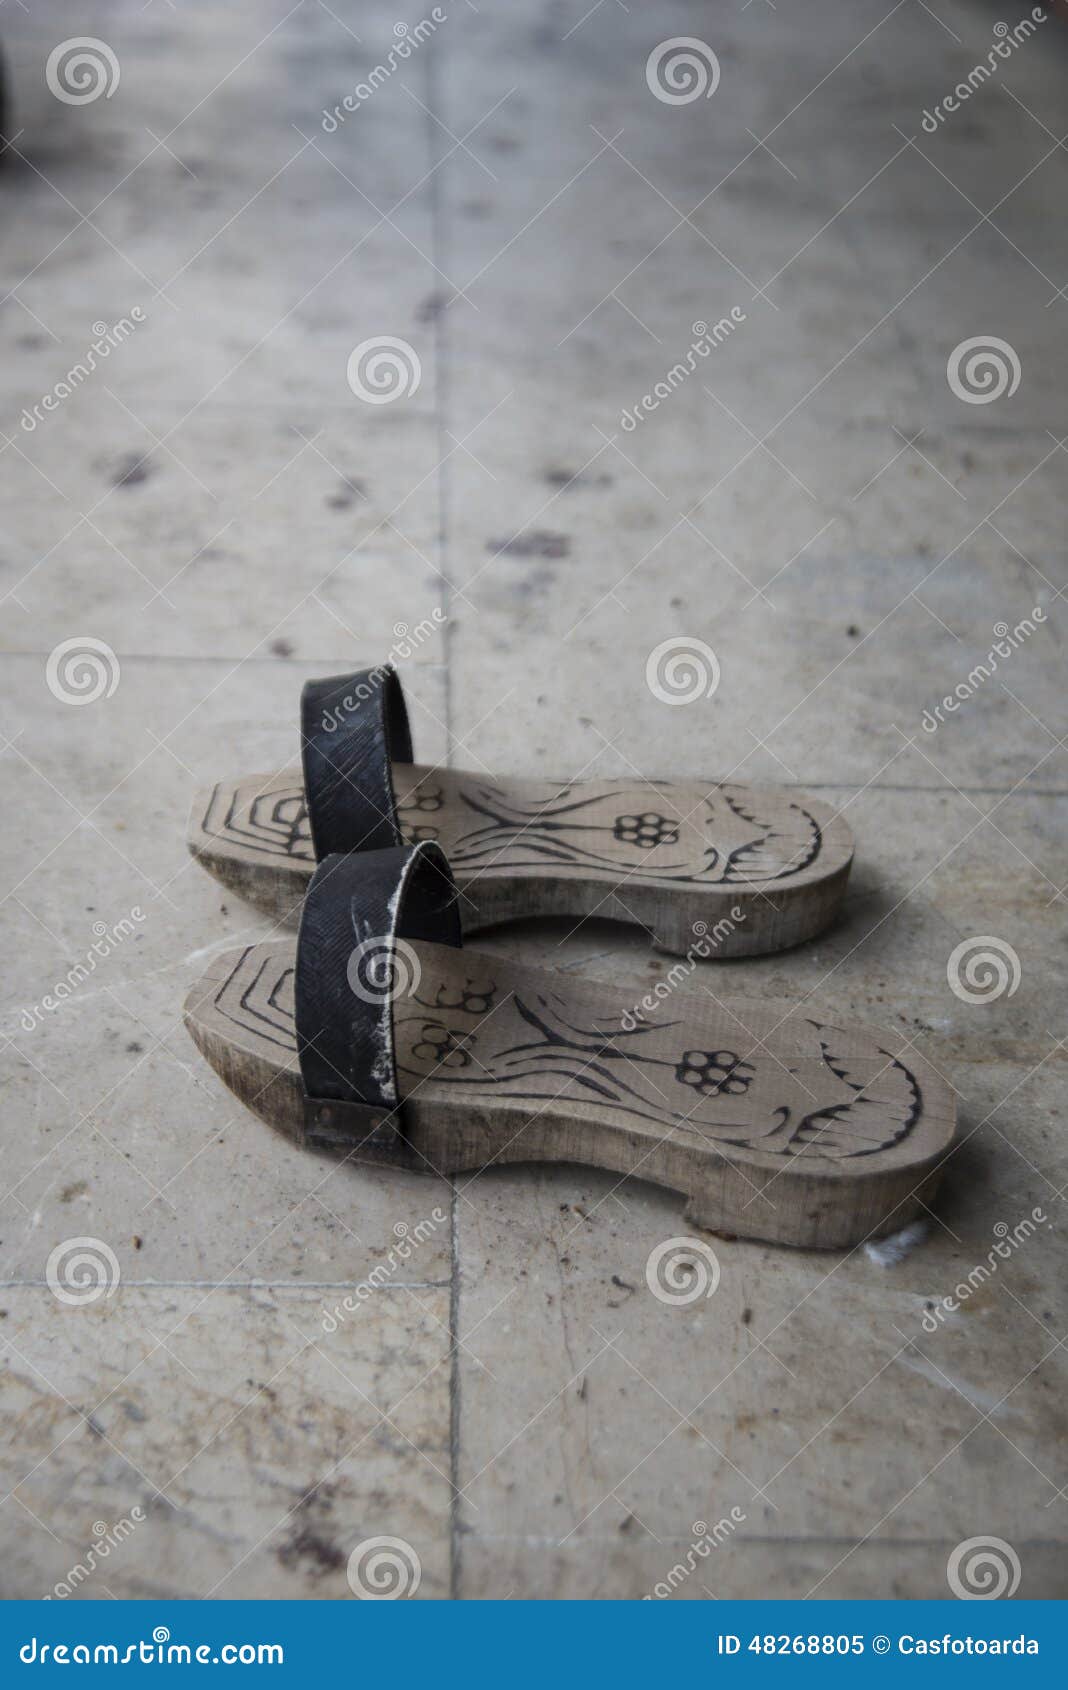 Clogs stock image. Image of object, shoe, muslim, ablution - 48268805